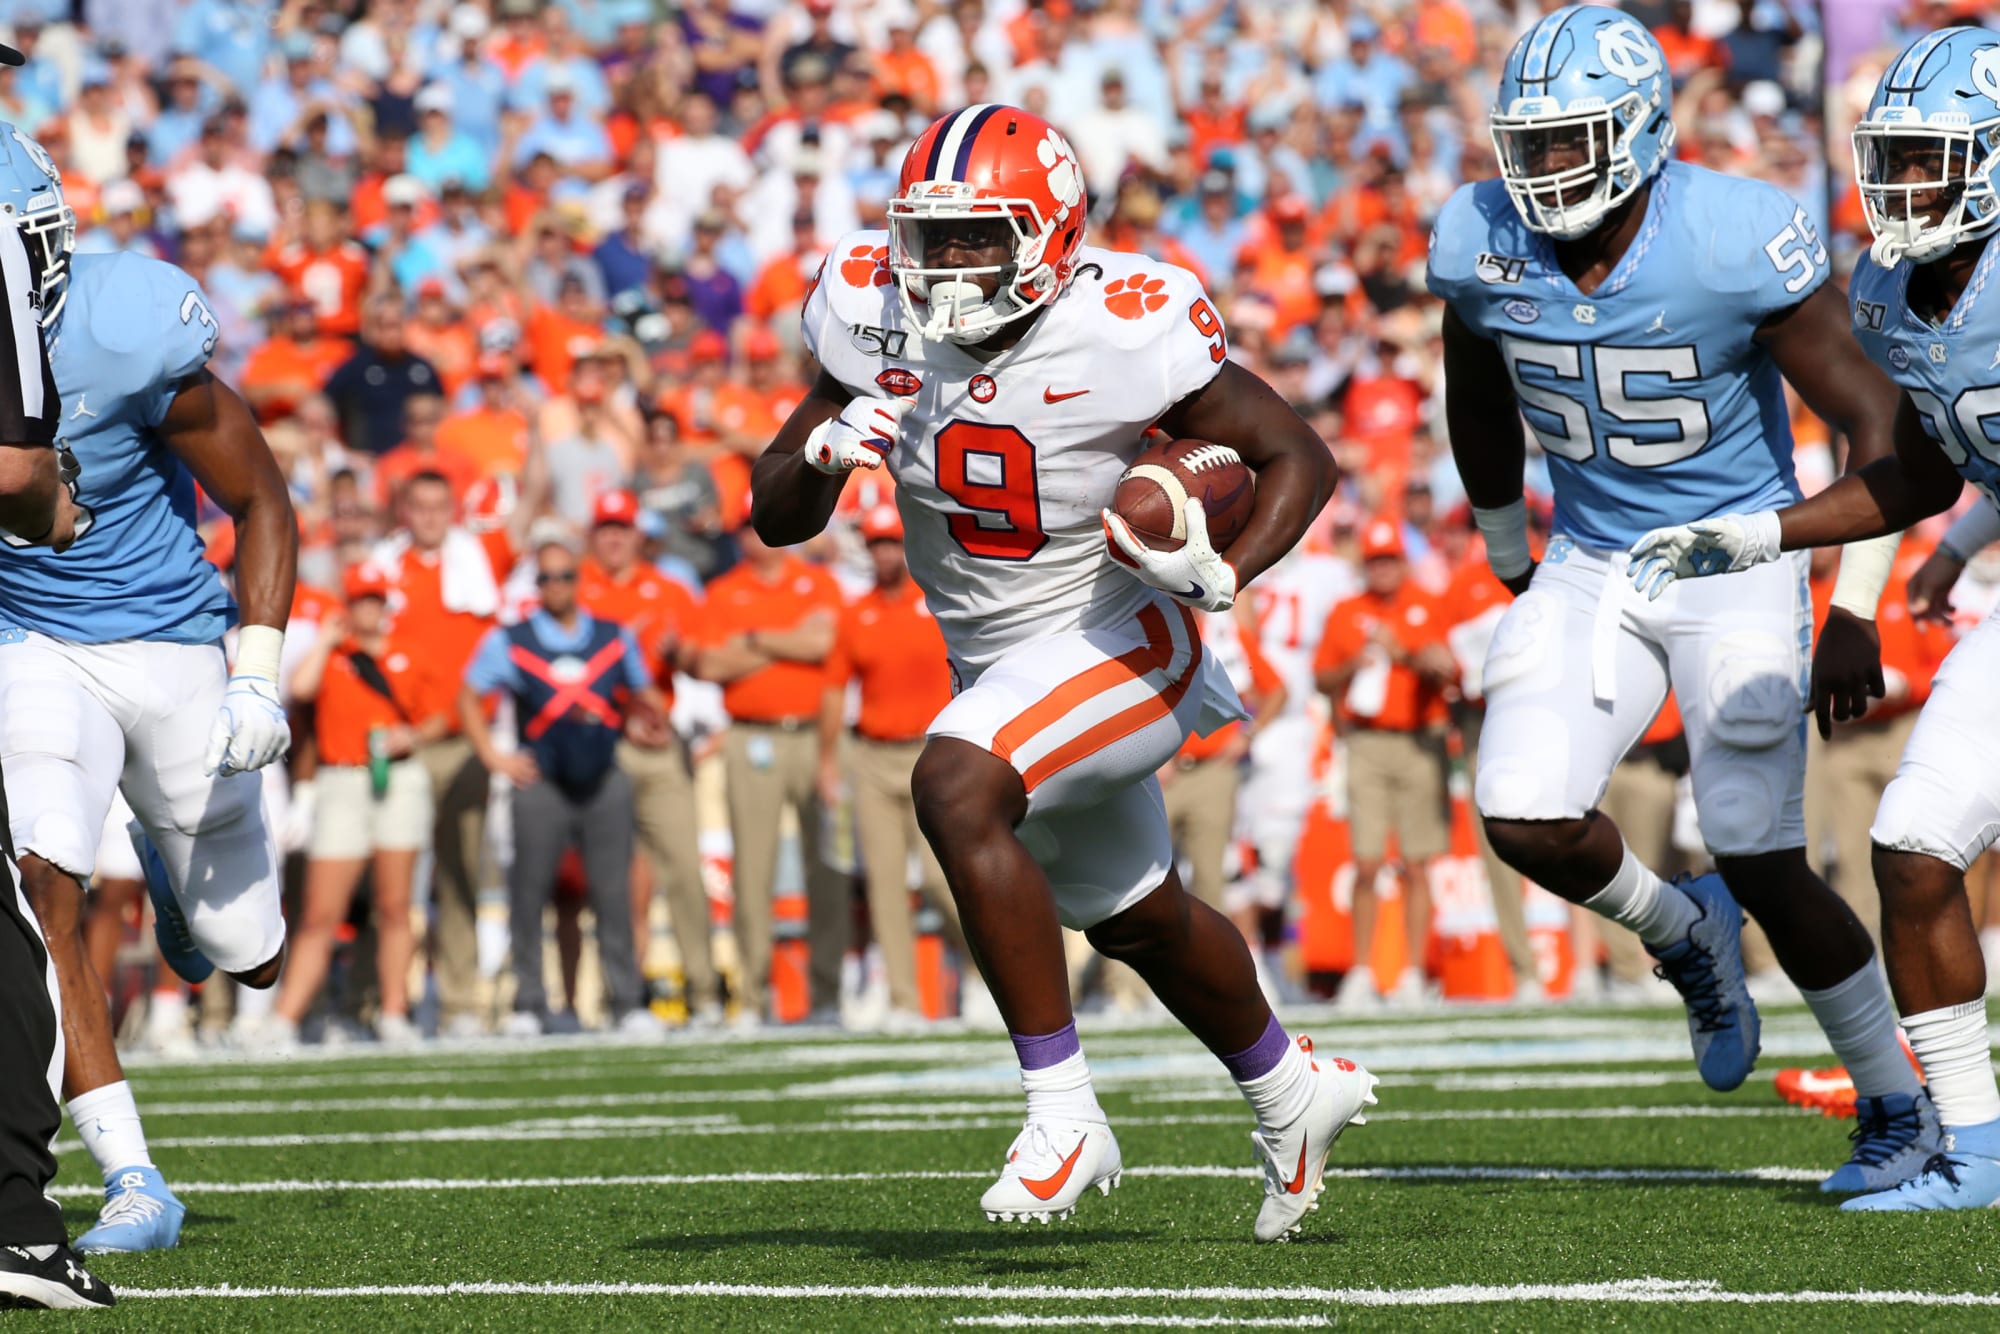 ACC Football preview, predictions for 2020 A Blitz Podcast